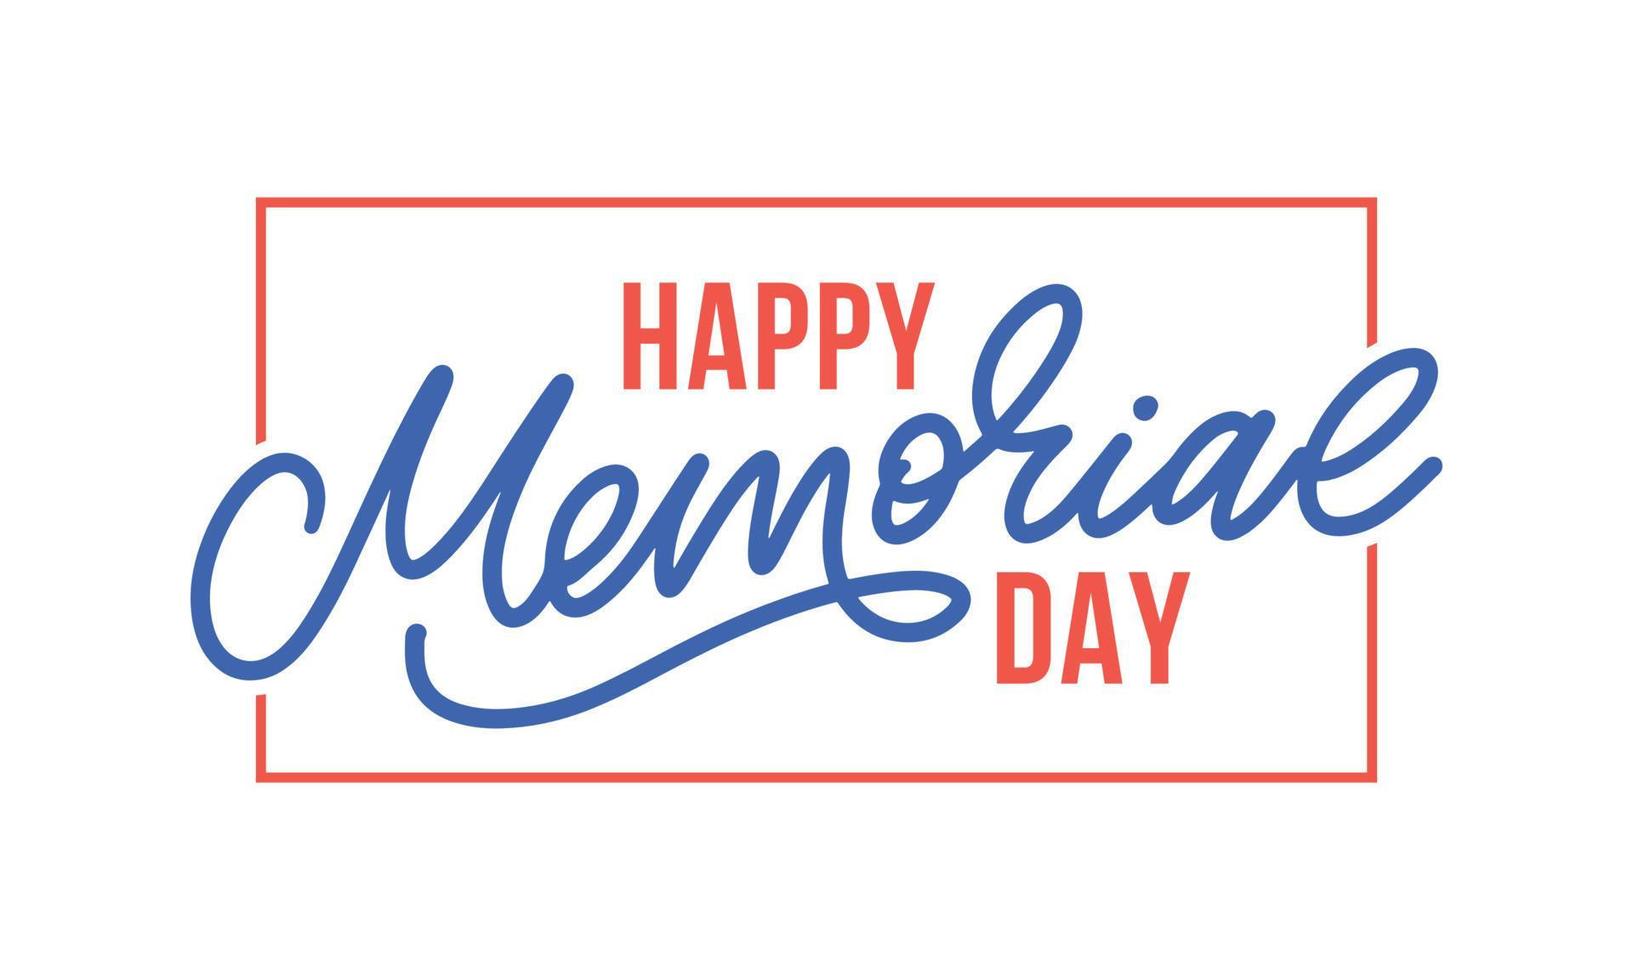 Happy Memorial Day - Stars and Stripes Letter vector